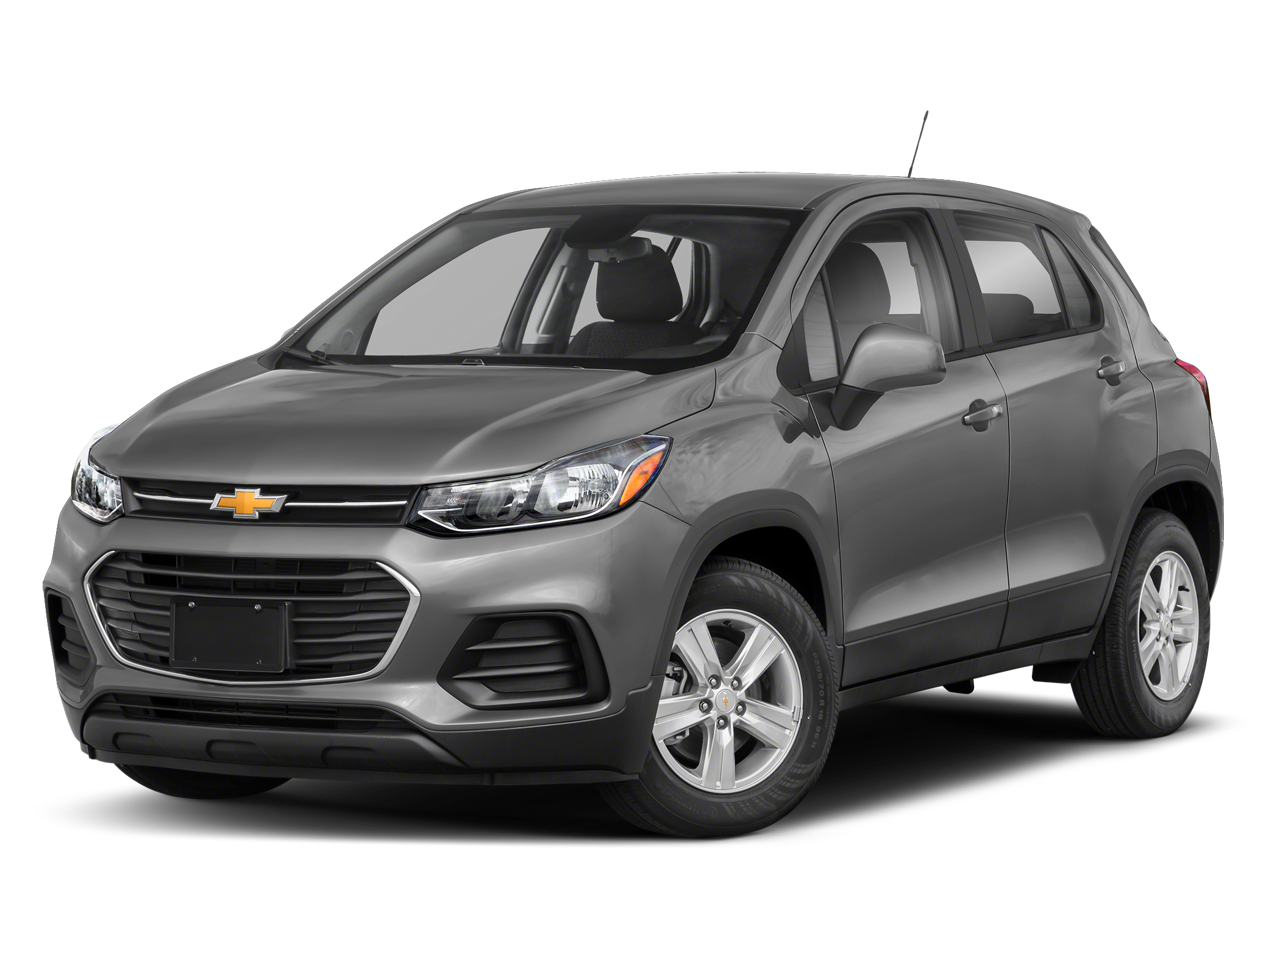 Used 2020 Chevrolet Trax LS with VIN 3GNCJKSB3LL162028 for sale in Herculaneum, MO